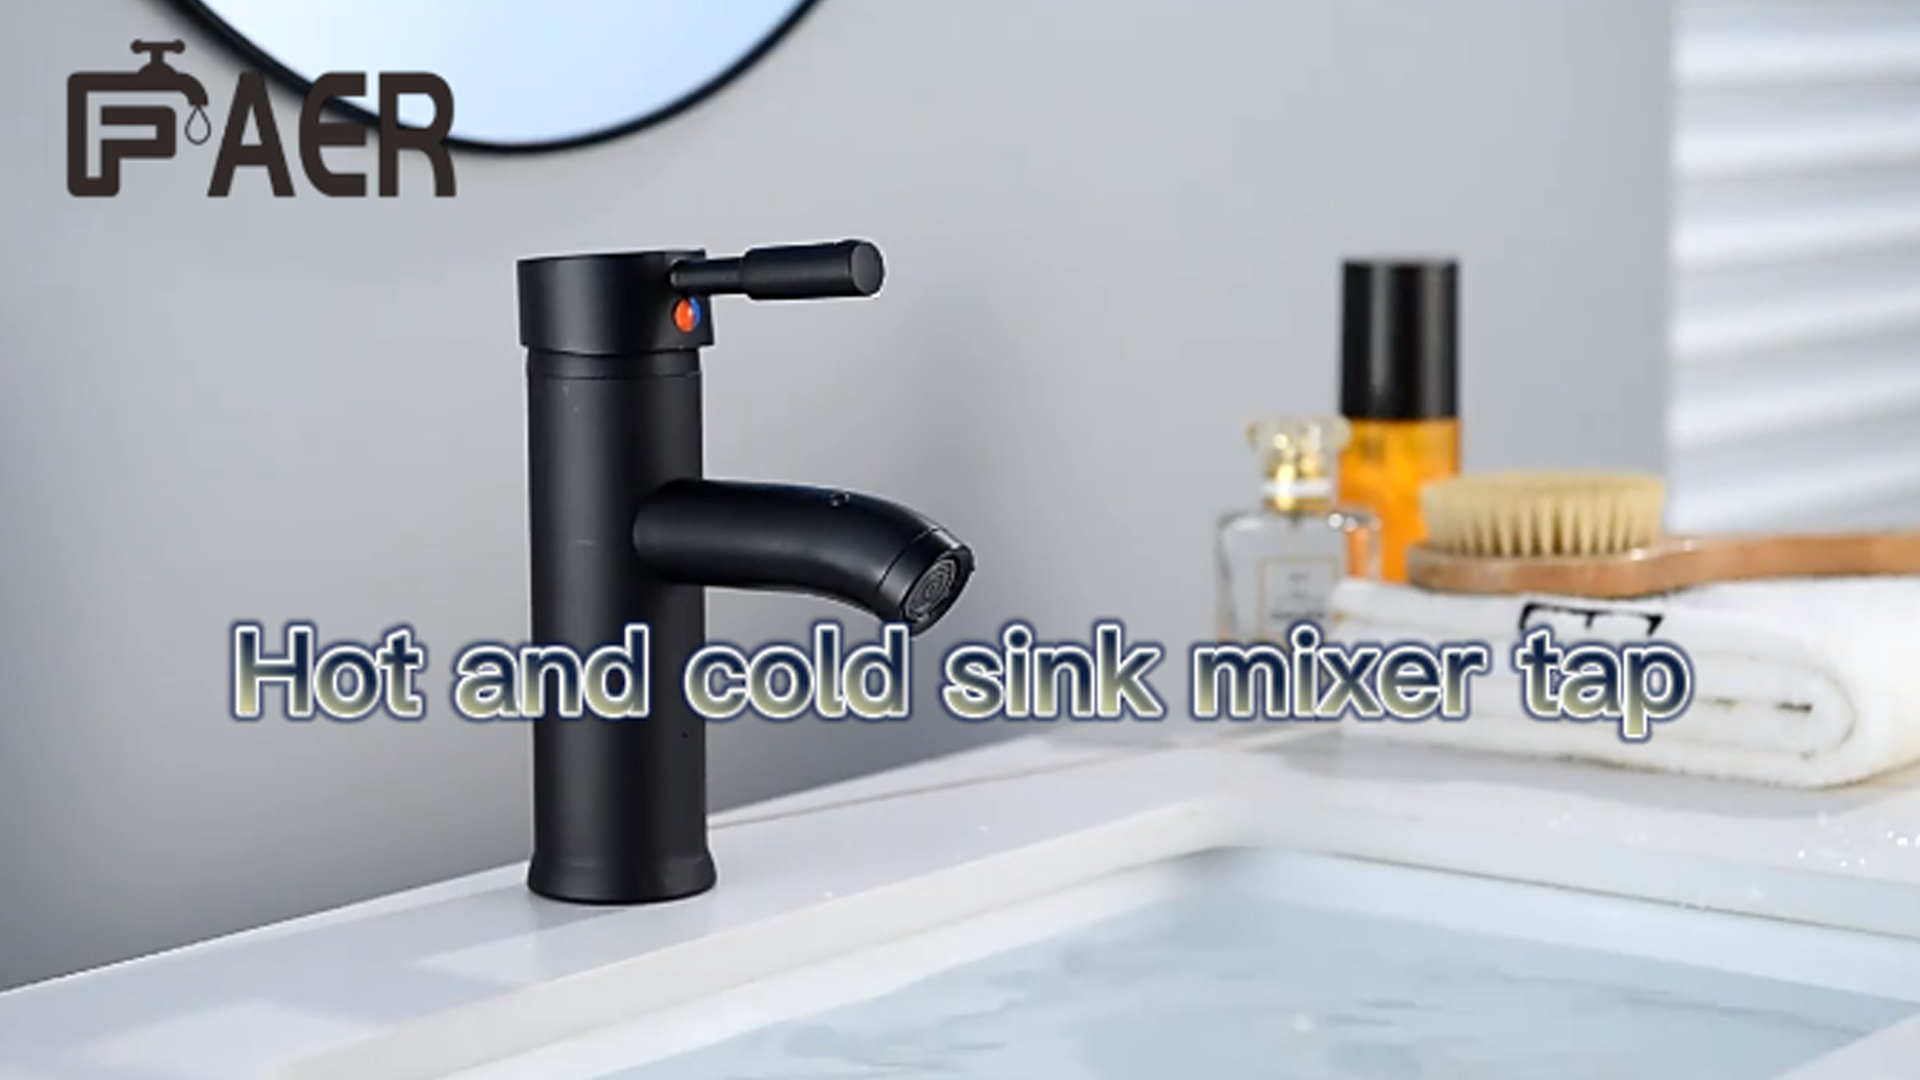 Hot and cold sink mixer tap